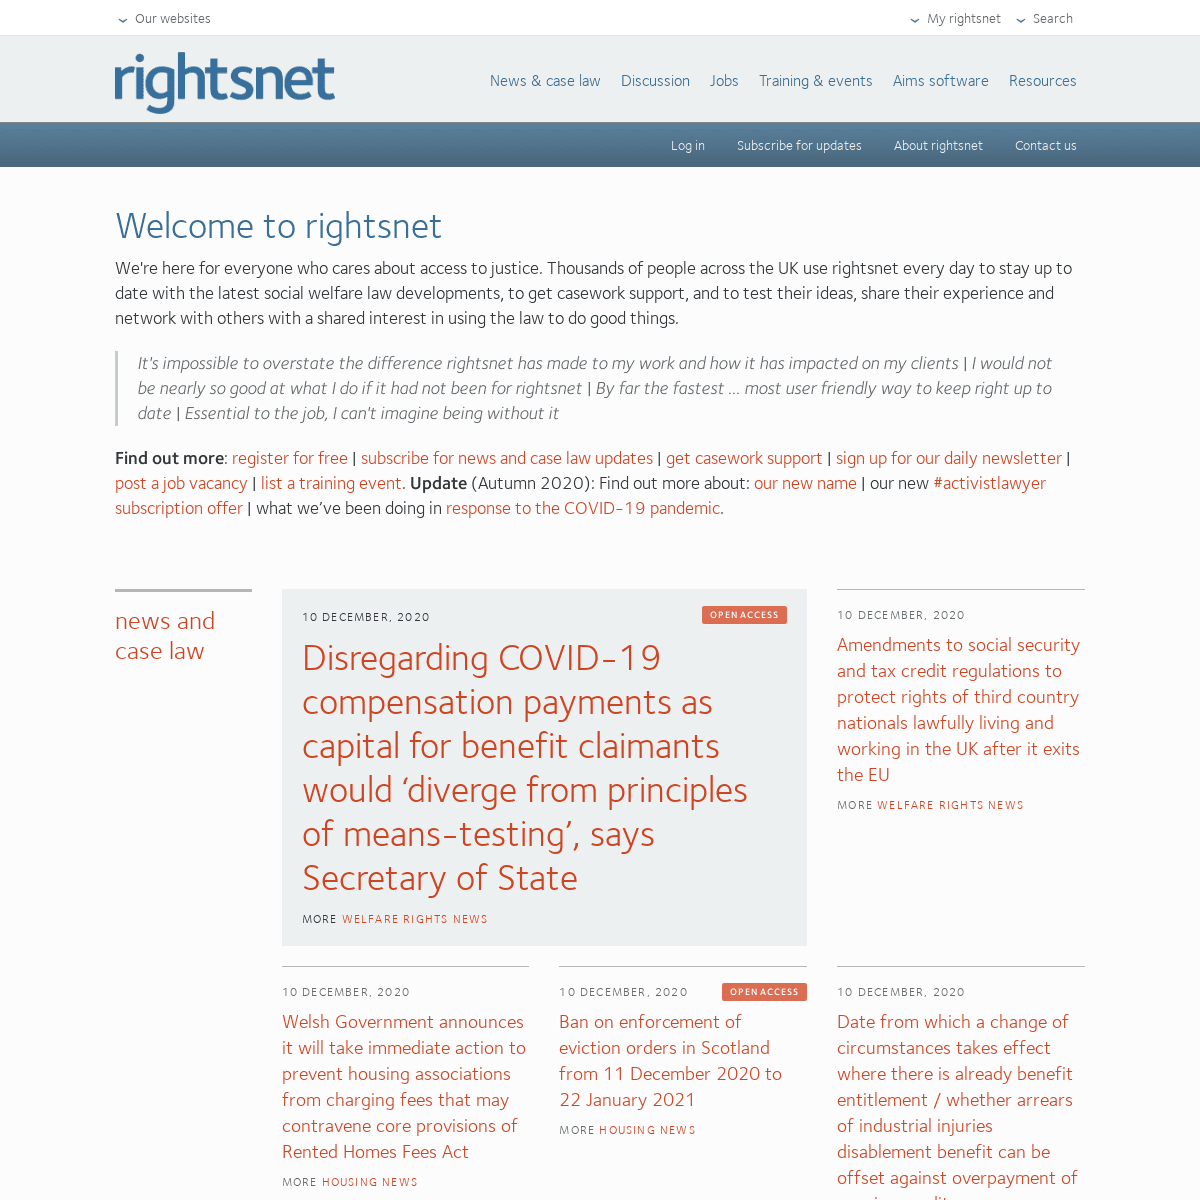 A complete backup of rightsnet.org.uk